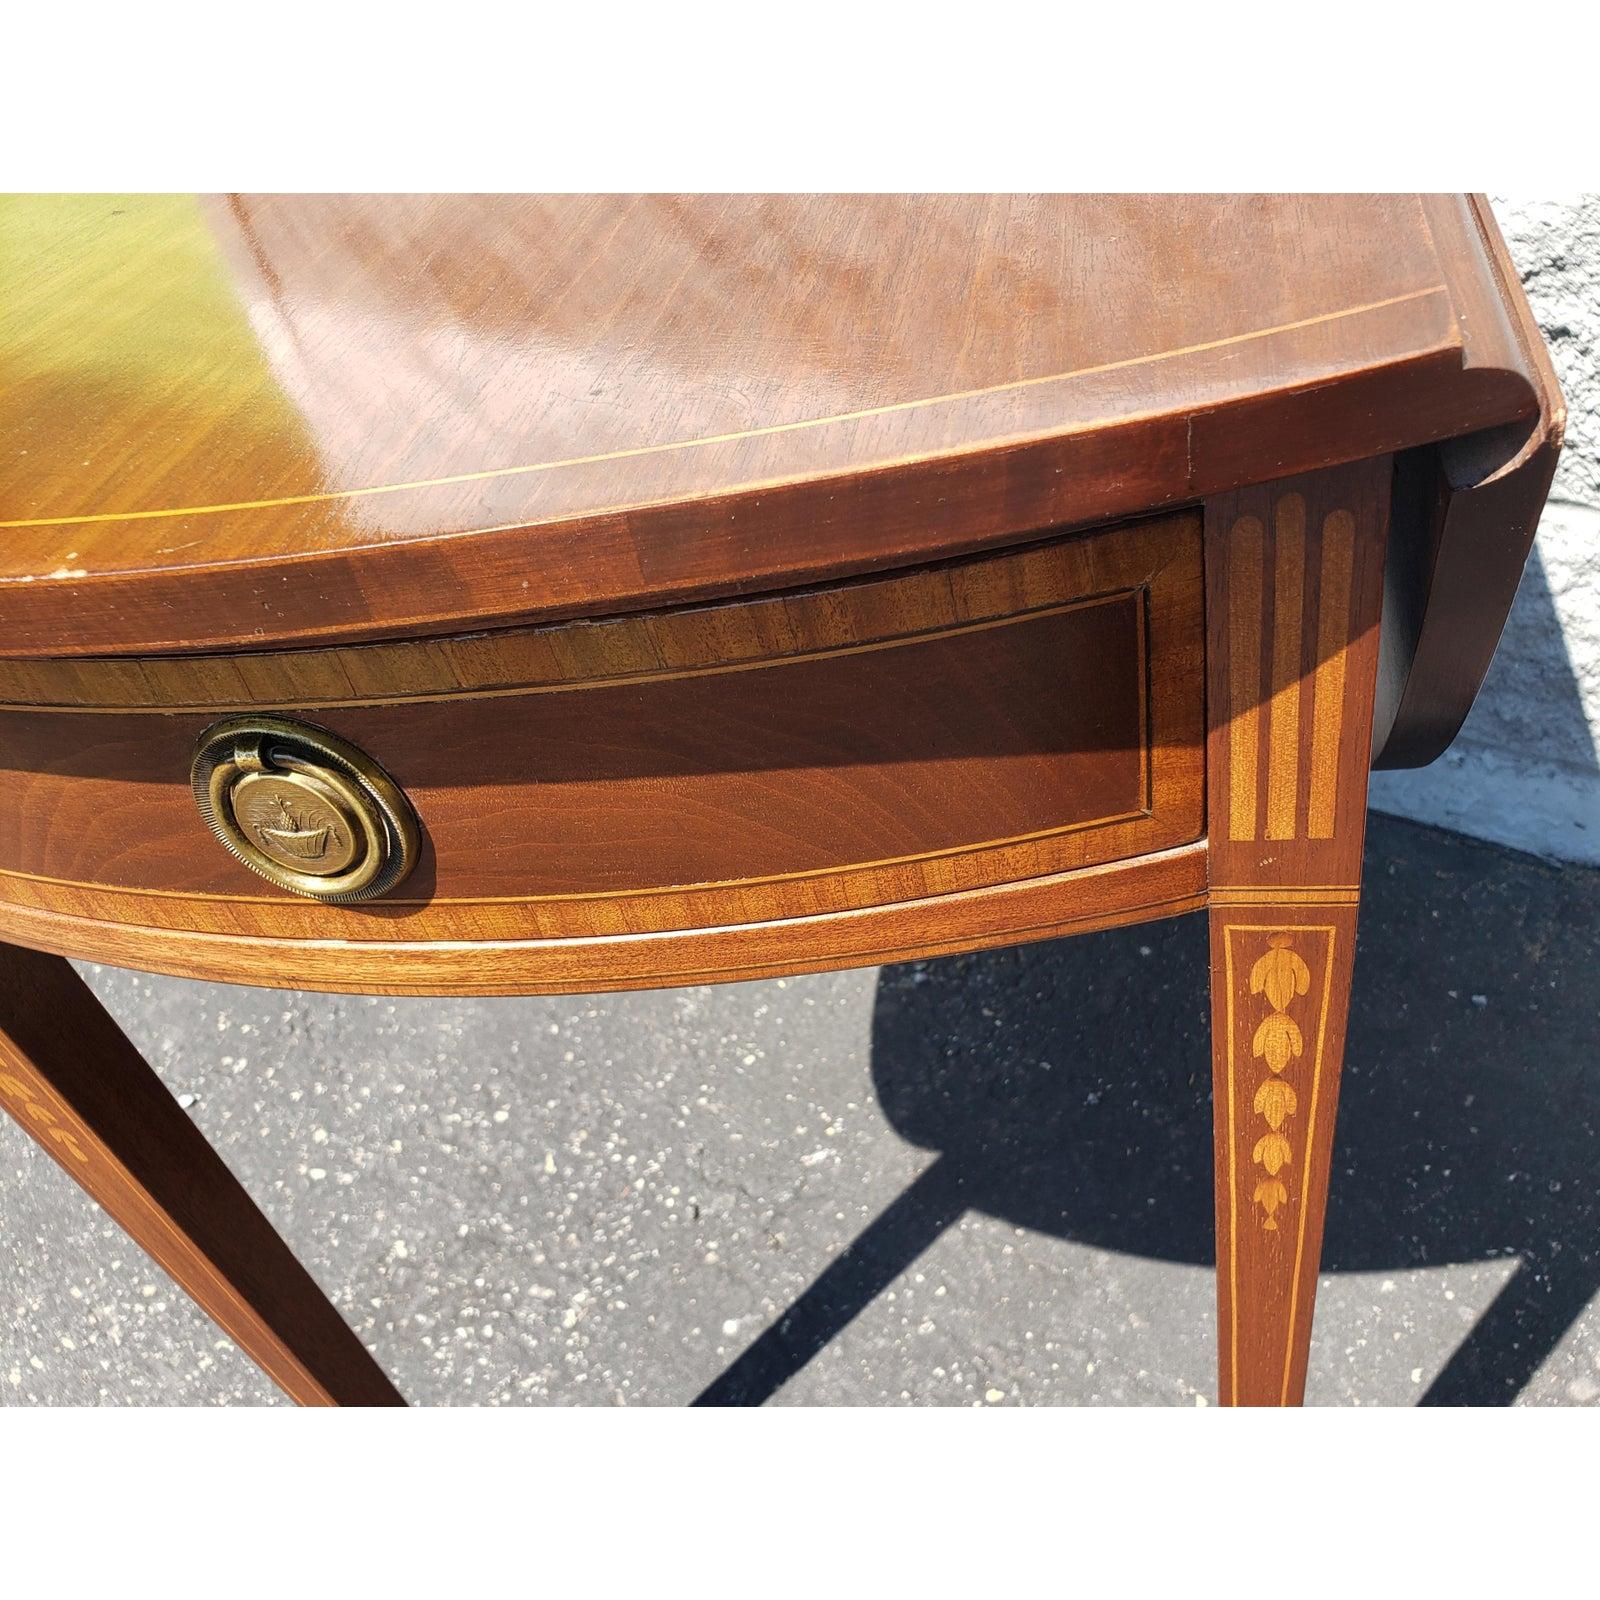 Late 20th Century 1970s Chippendale Inlaid Mahogany and Satin Wood Drop Leaf Pembroke Table